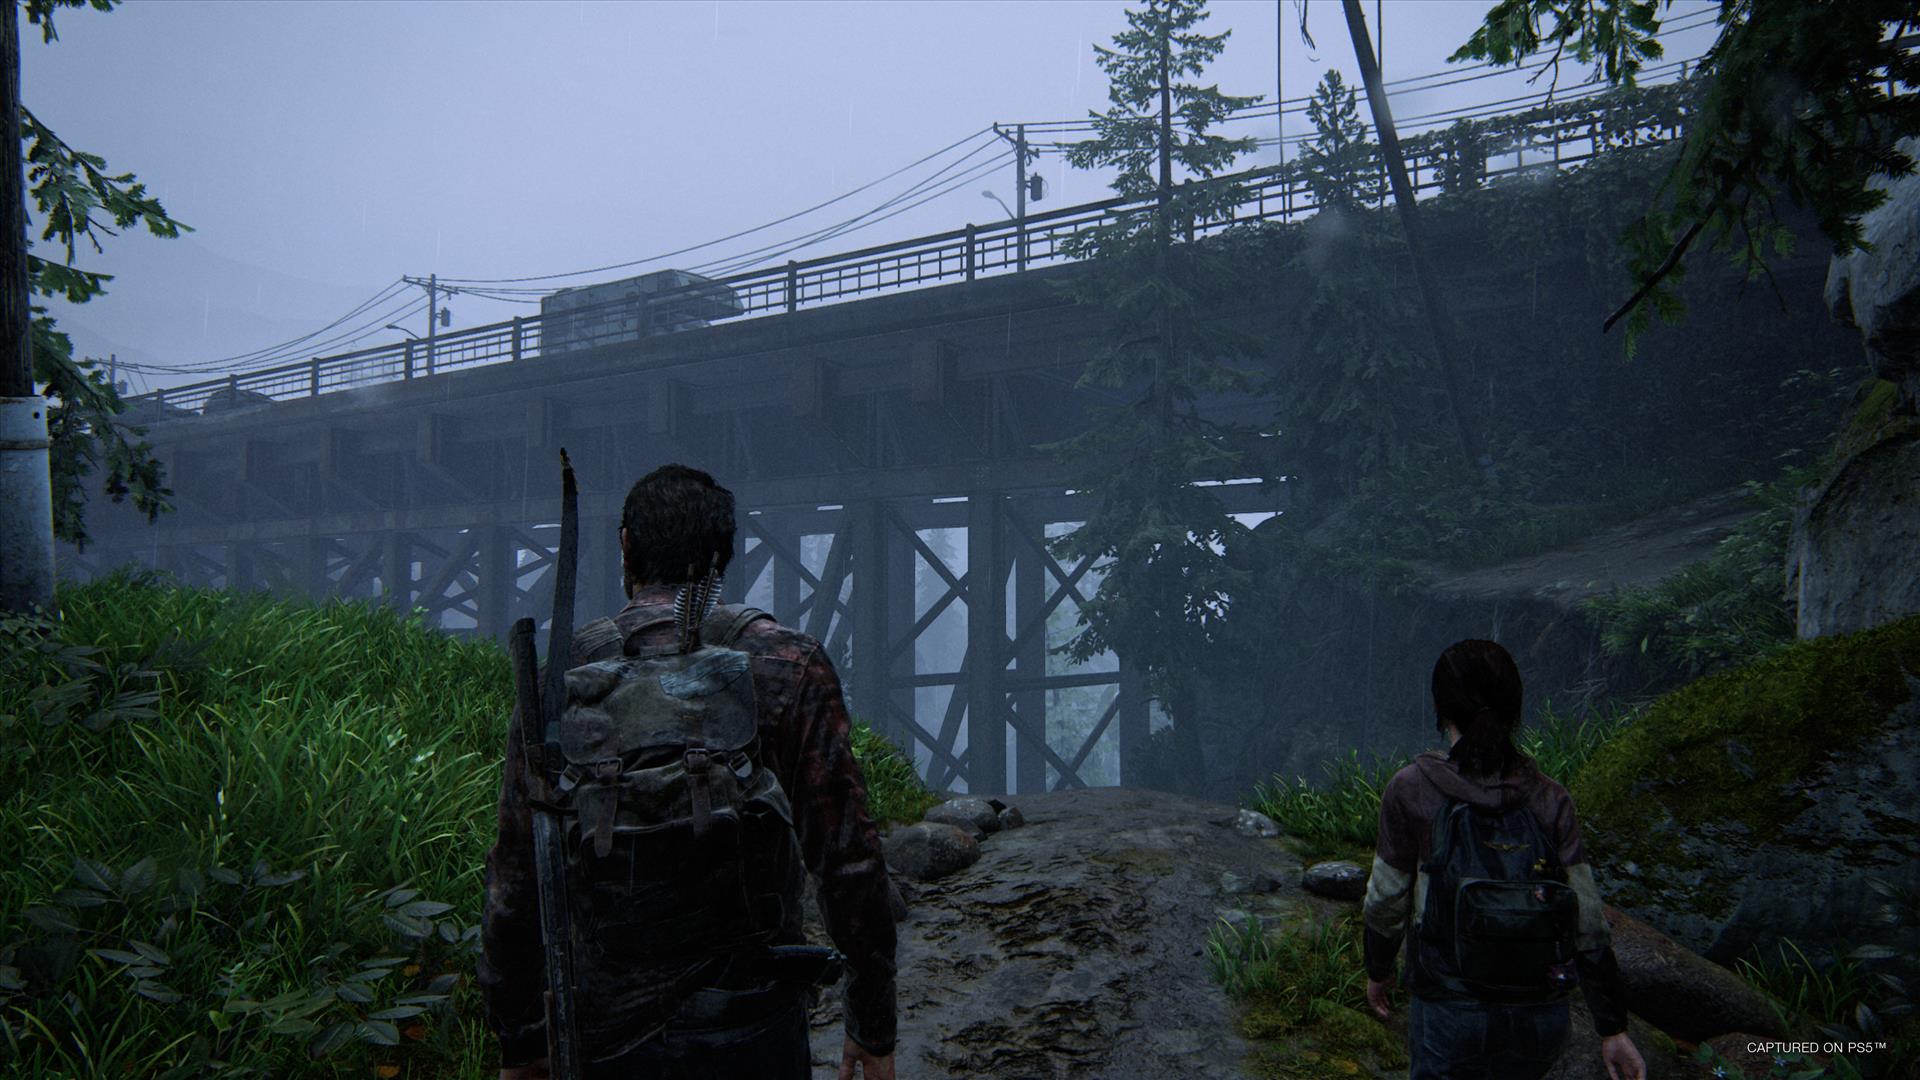 The Last of Us Part 2 tech review: a Naughty Dog masterclass